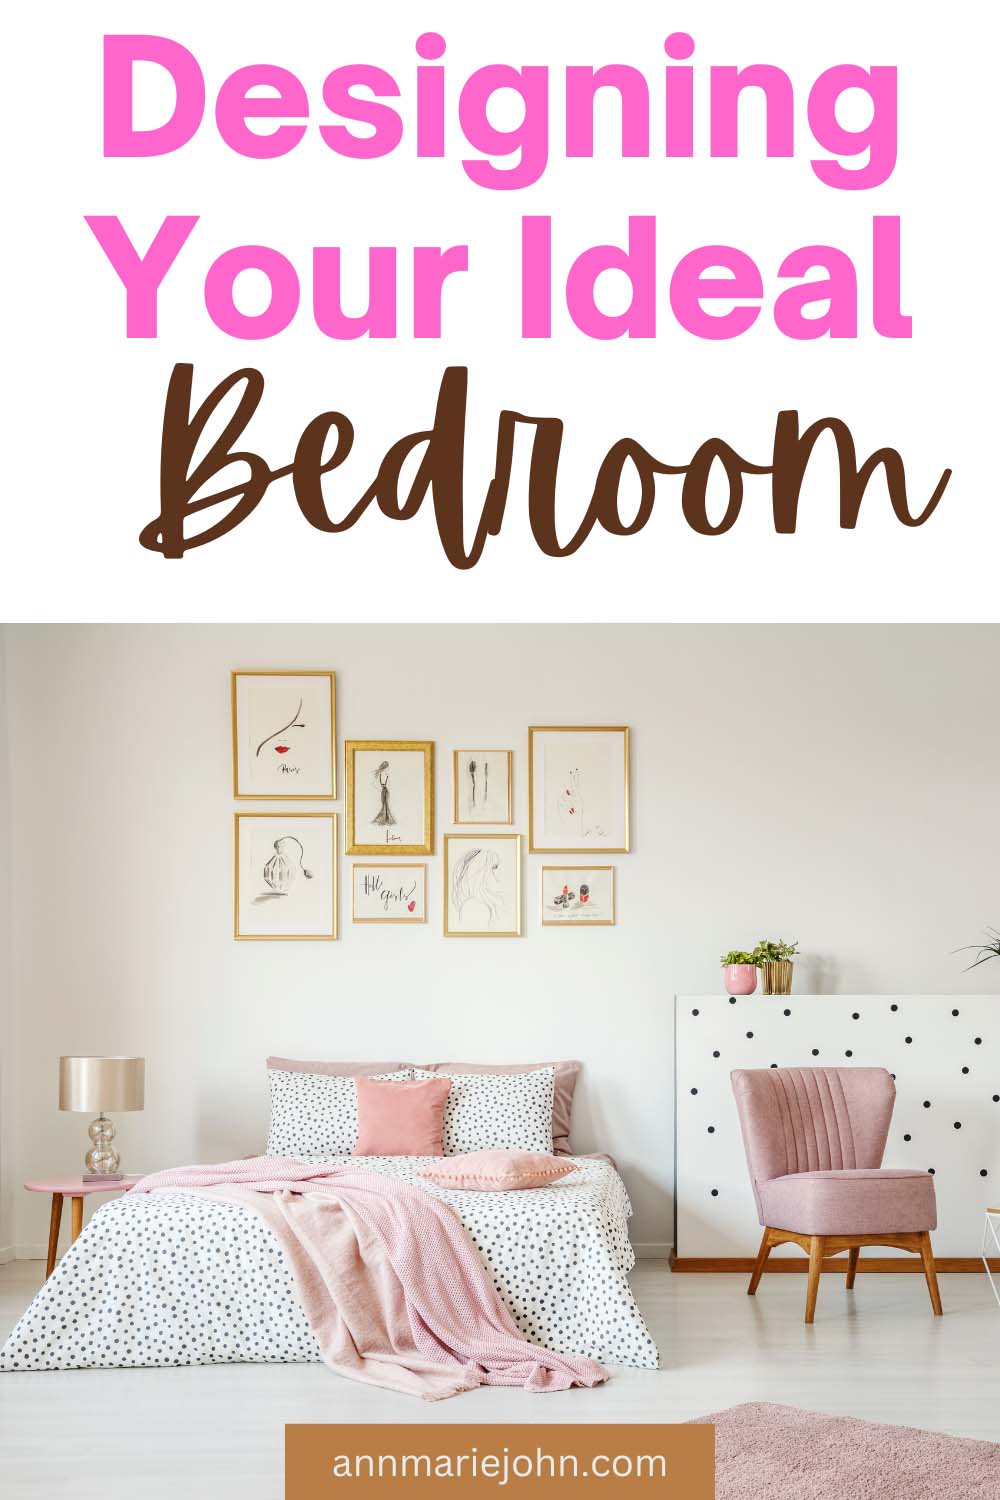 Designing Your Ideal Bedroom